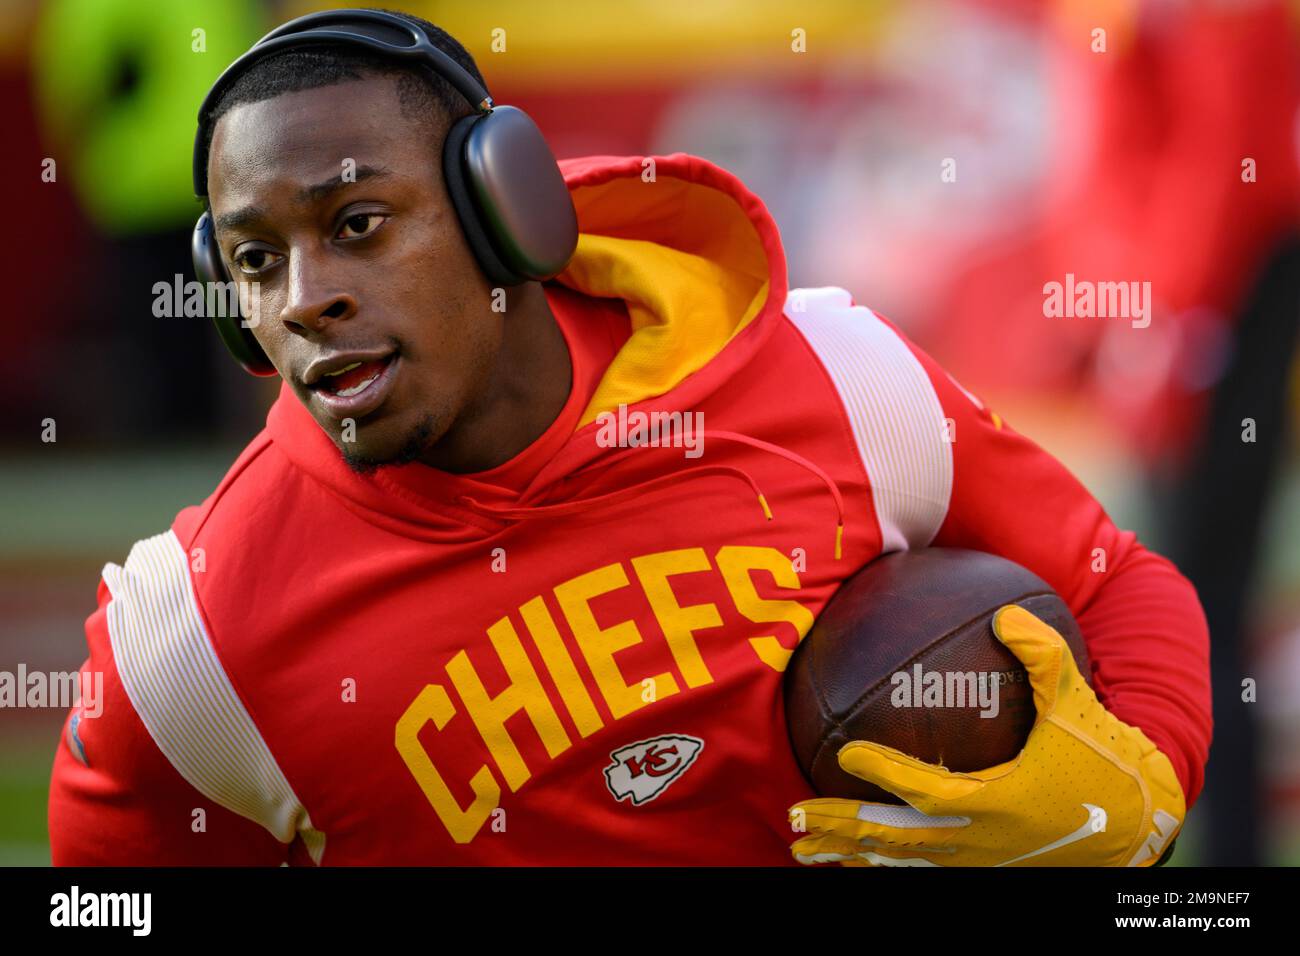 Kansas City Chiefs wide receiver Cornell Powell during warmups